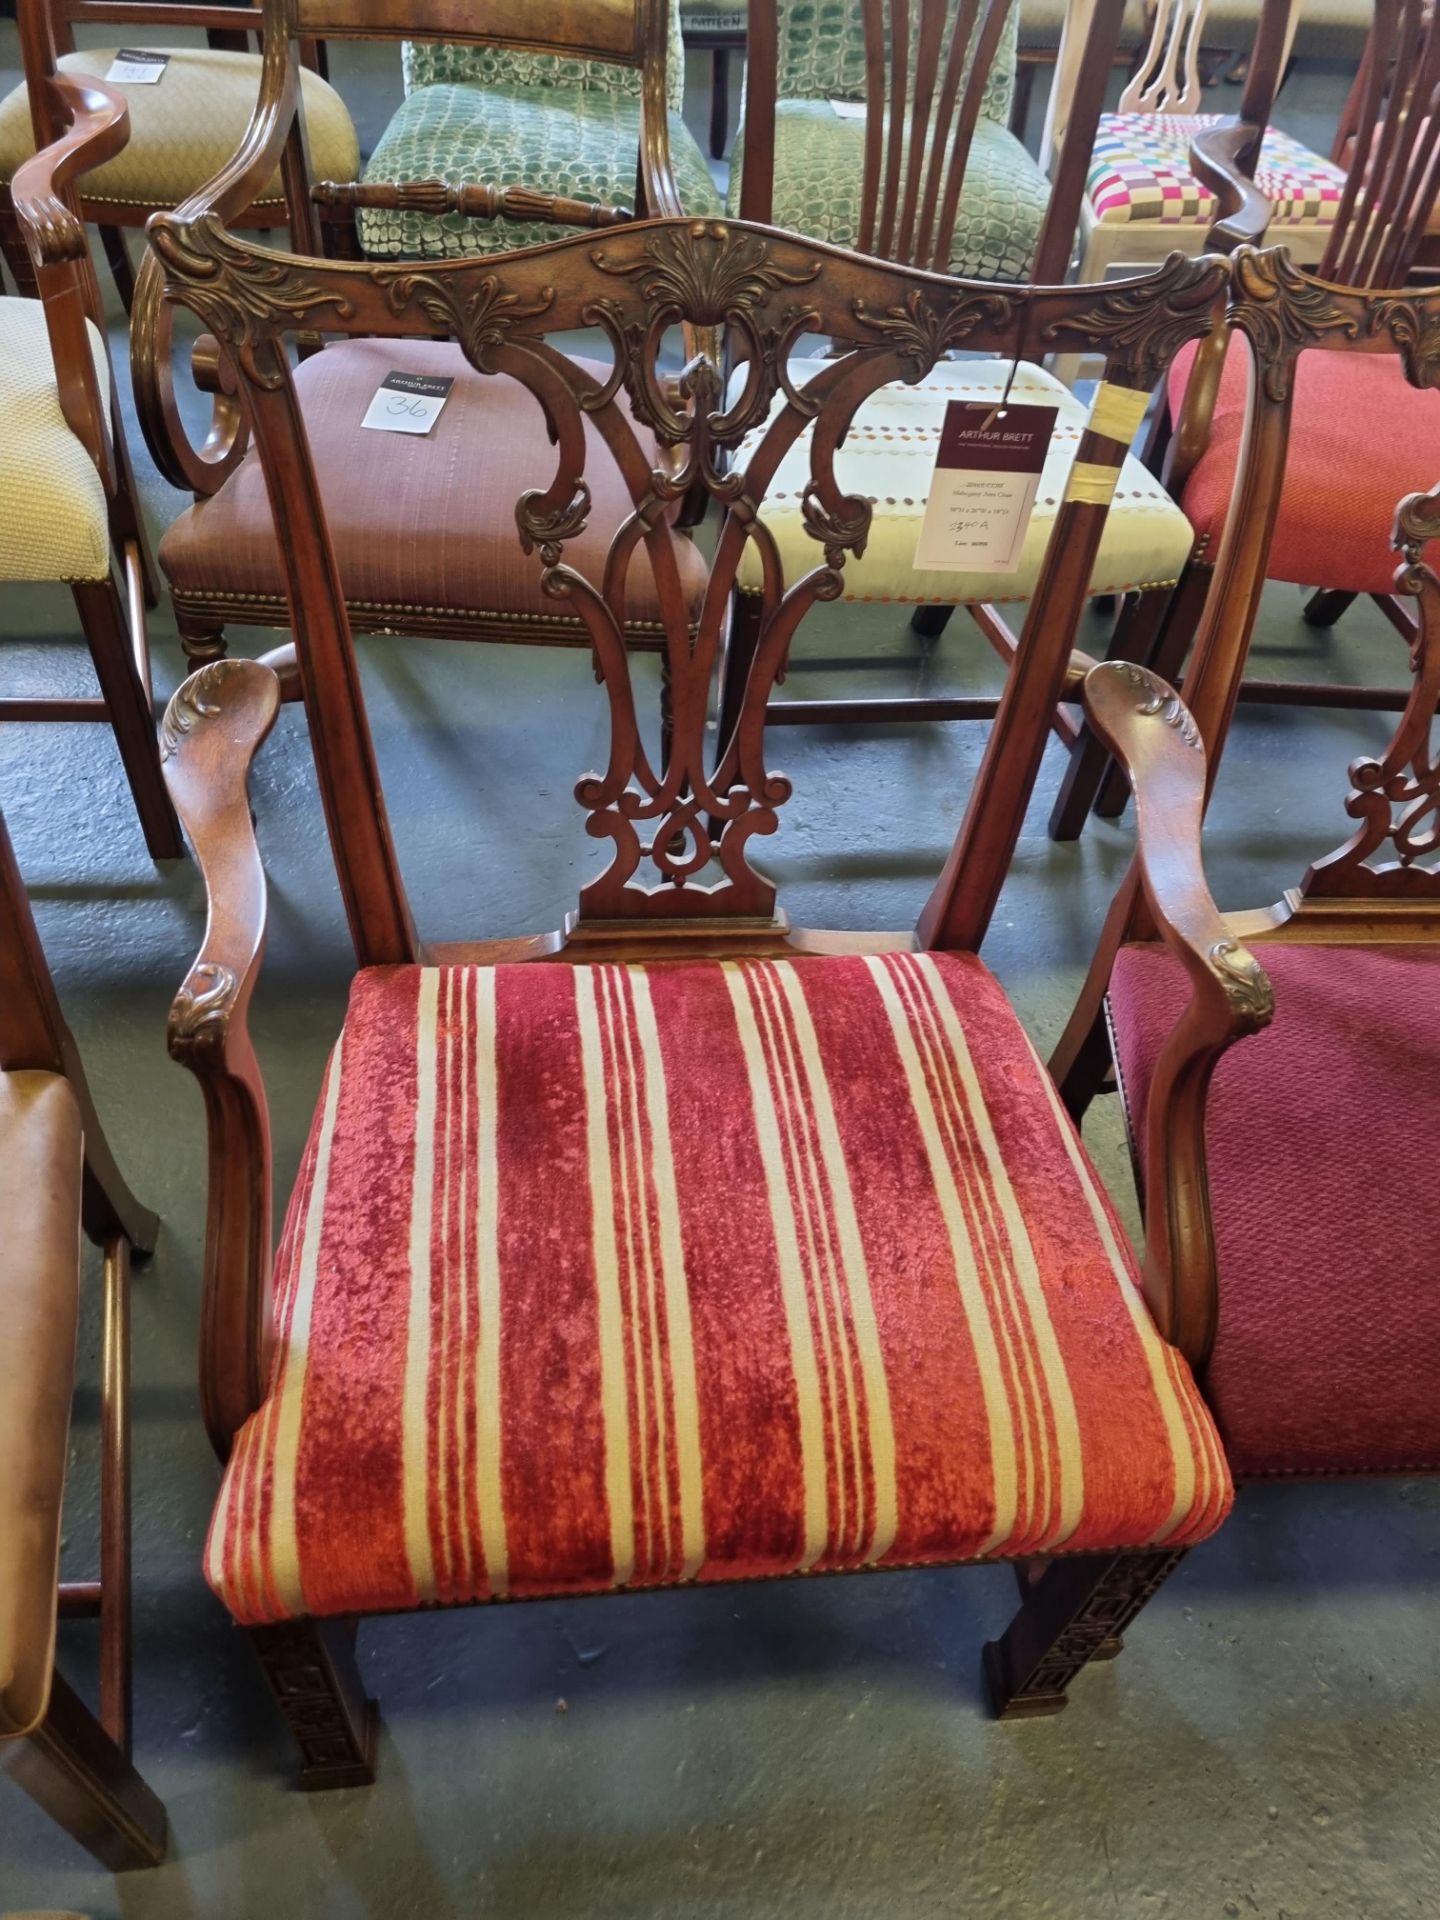 3 X Arthur Brett Mahogany Upholstered Dining Chairs With Subtly Carved Detail To Back And Front Legs - Image 4 of 5